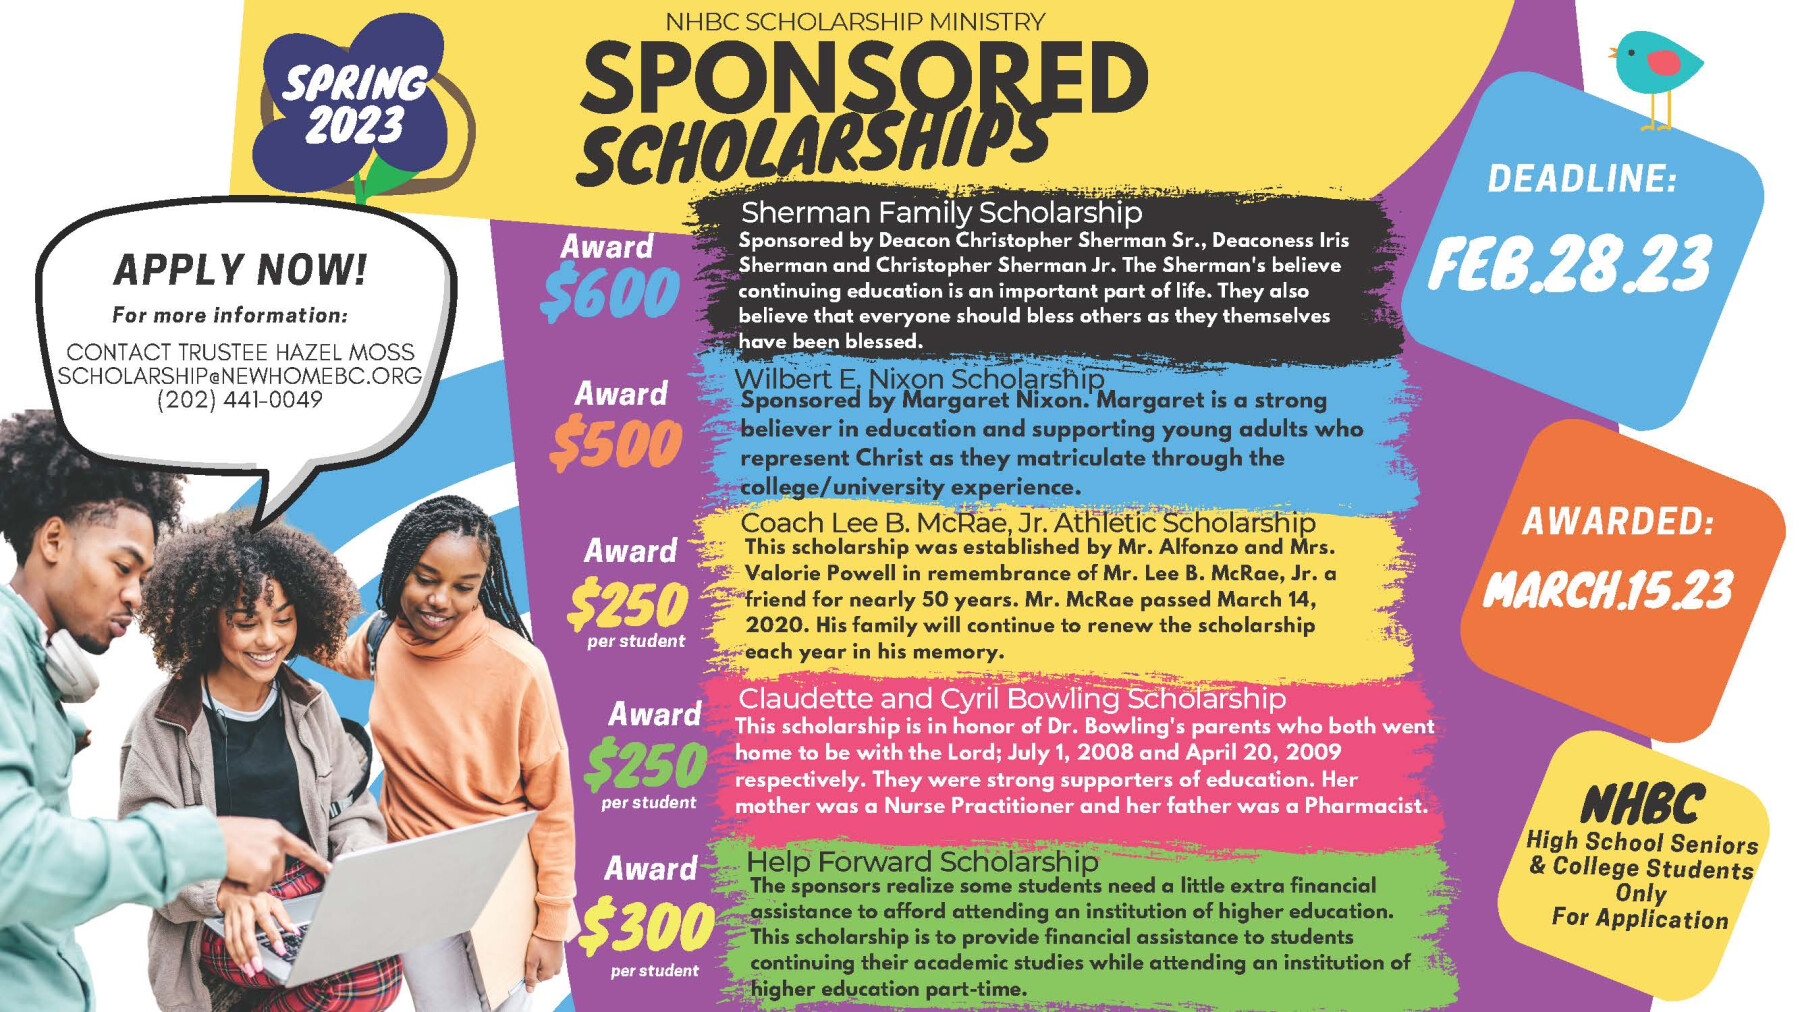 2023 Sponsored Scholarship (Due by Feb 28, 2023) 